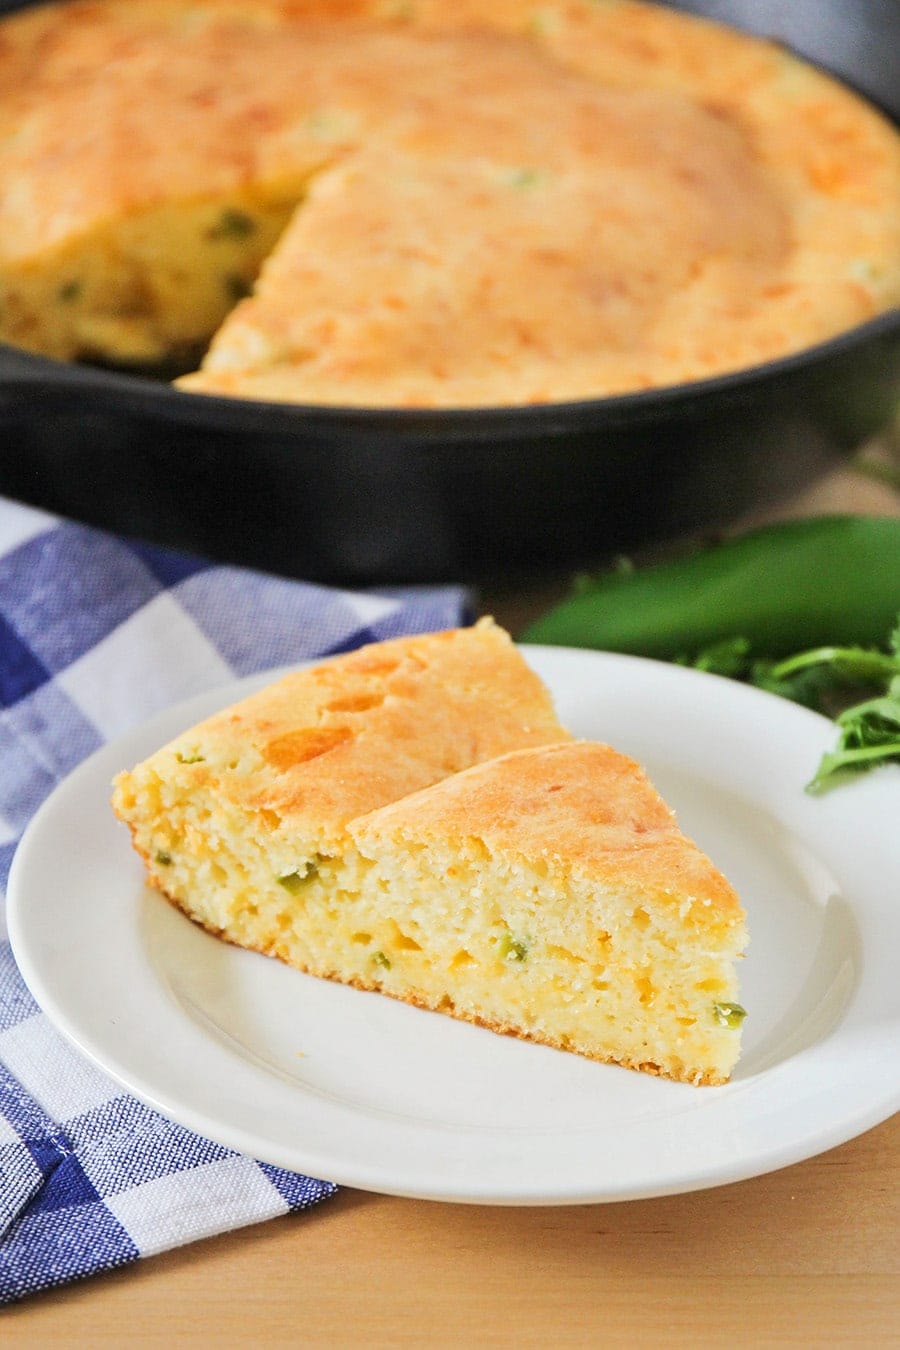 Mexican soup recipes - Jalapeno cornbread for serving with soup.